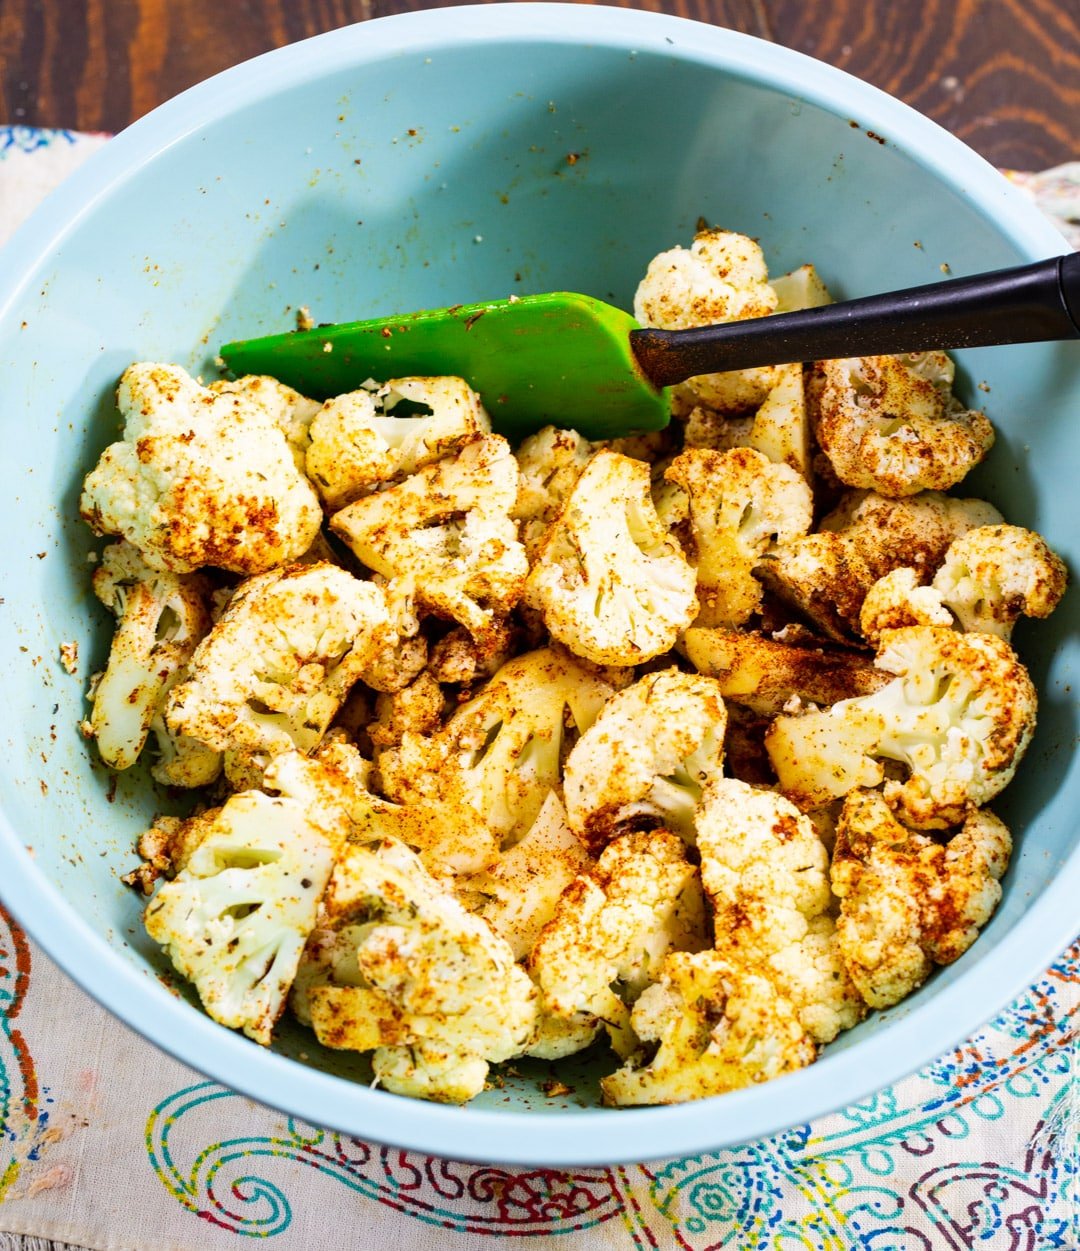 Uncooked cauliflower tossed with spices in a bowl.